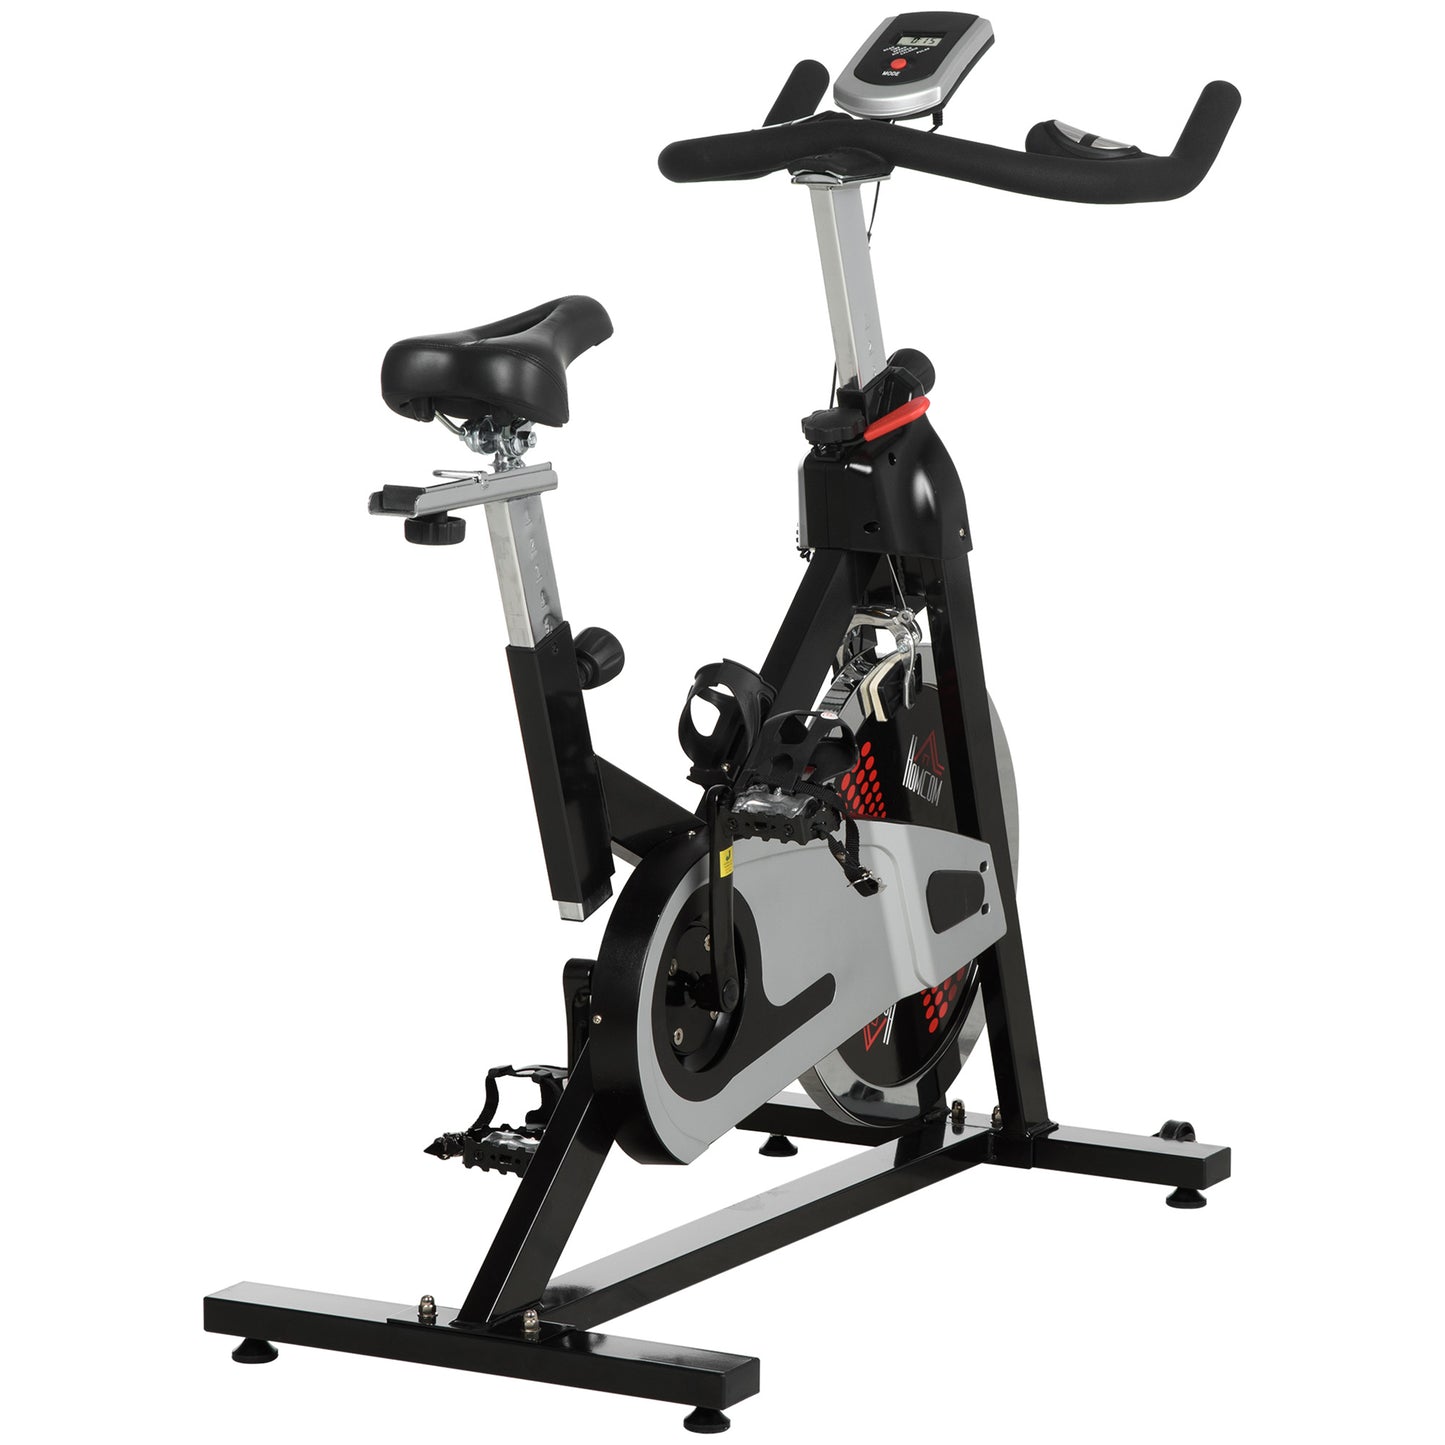 HOMCOM Indoor Exercise Bike, Stationary Bike, Cycling Machine with Adjustable Seat & Resistance, Wheels, 18kg Flywheel, Cup Holder and LCD Monitor